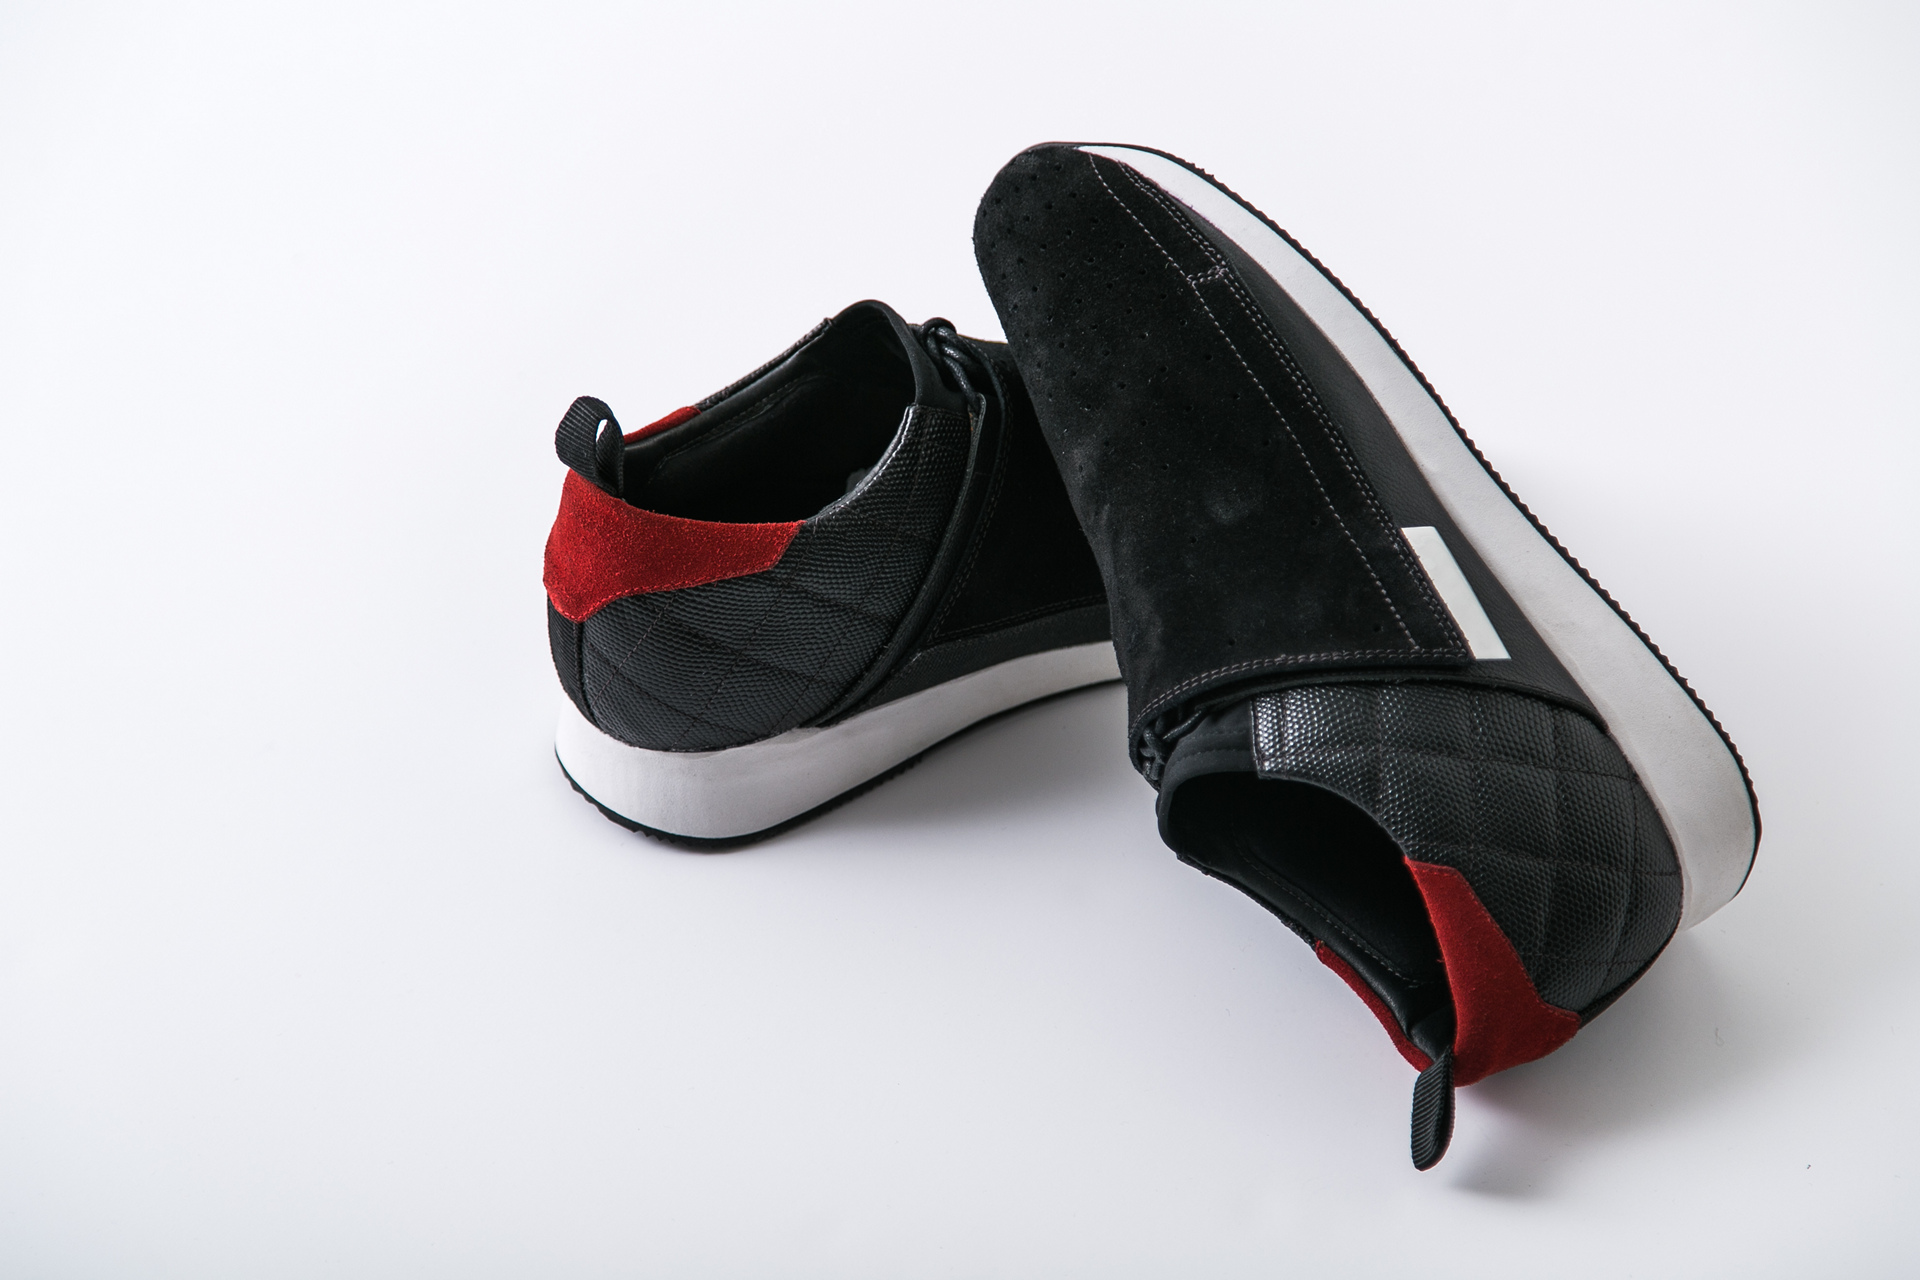 Thrillist, JackThreads and Honda Team Up to Create Exclusive HT3 Driving Shoe © Honda Motor Co., Ltd.